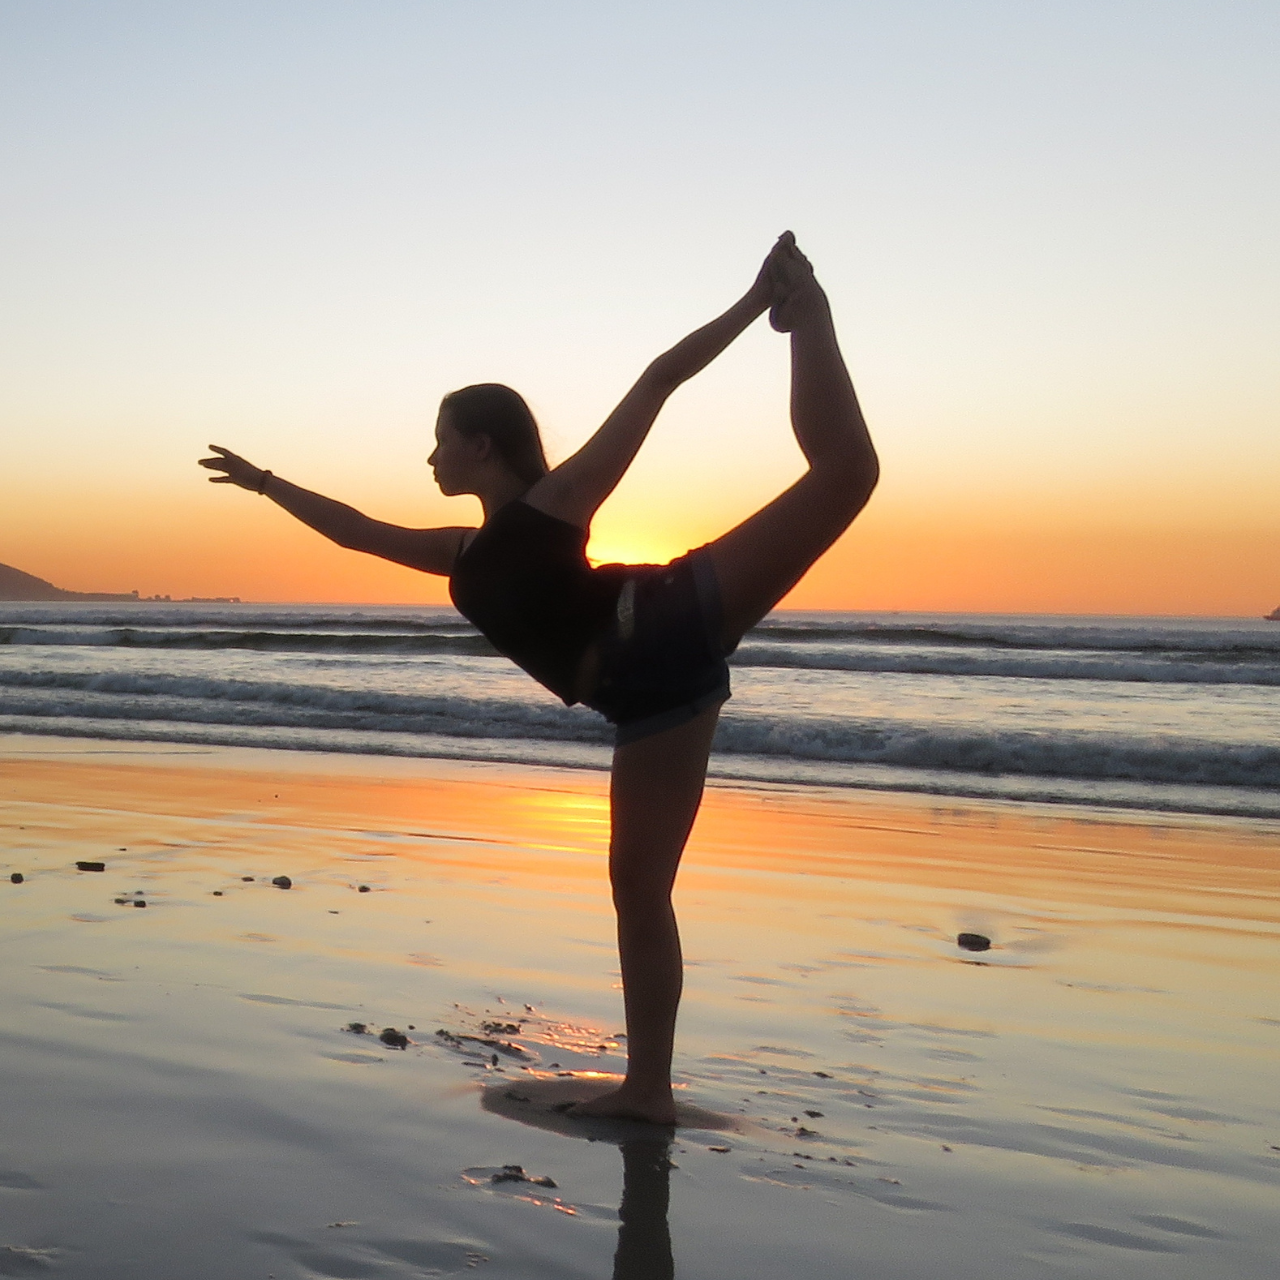 Silhouette of Woman Doing Yoga at the Beach